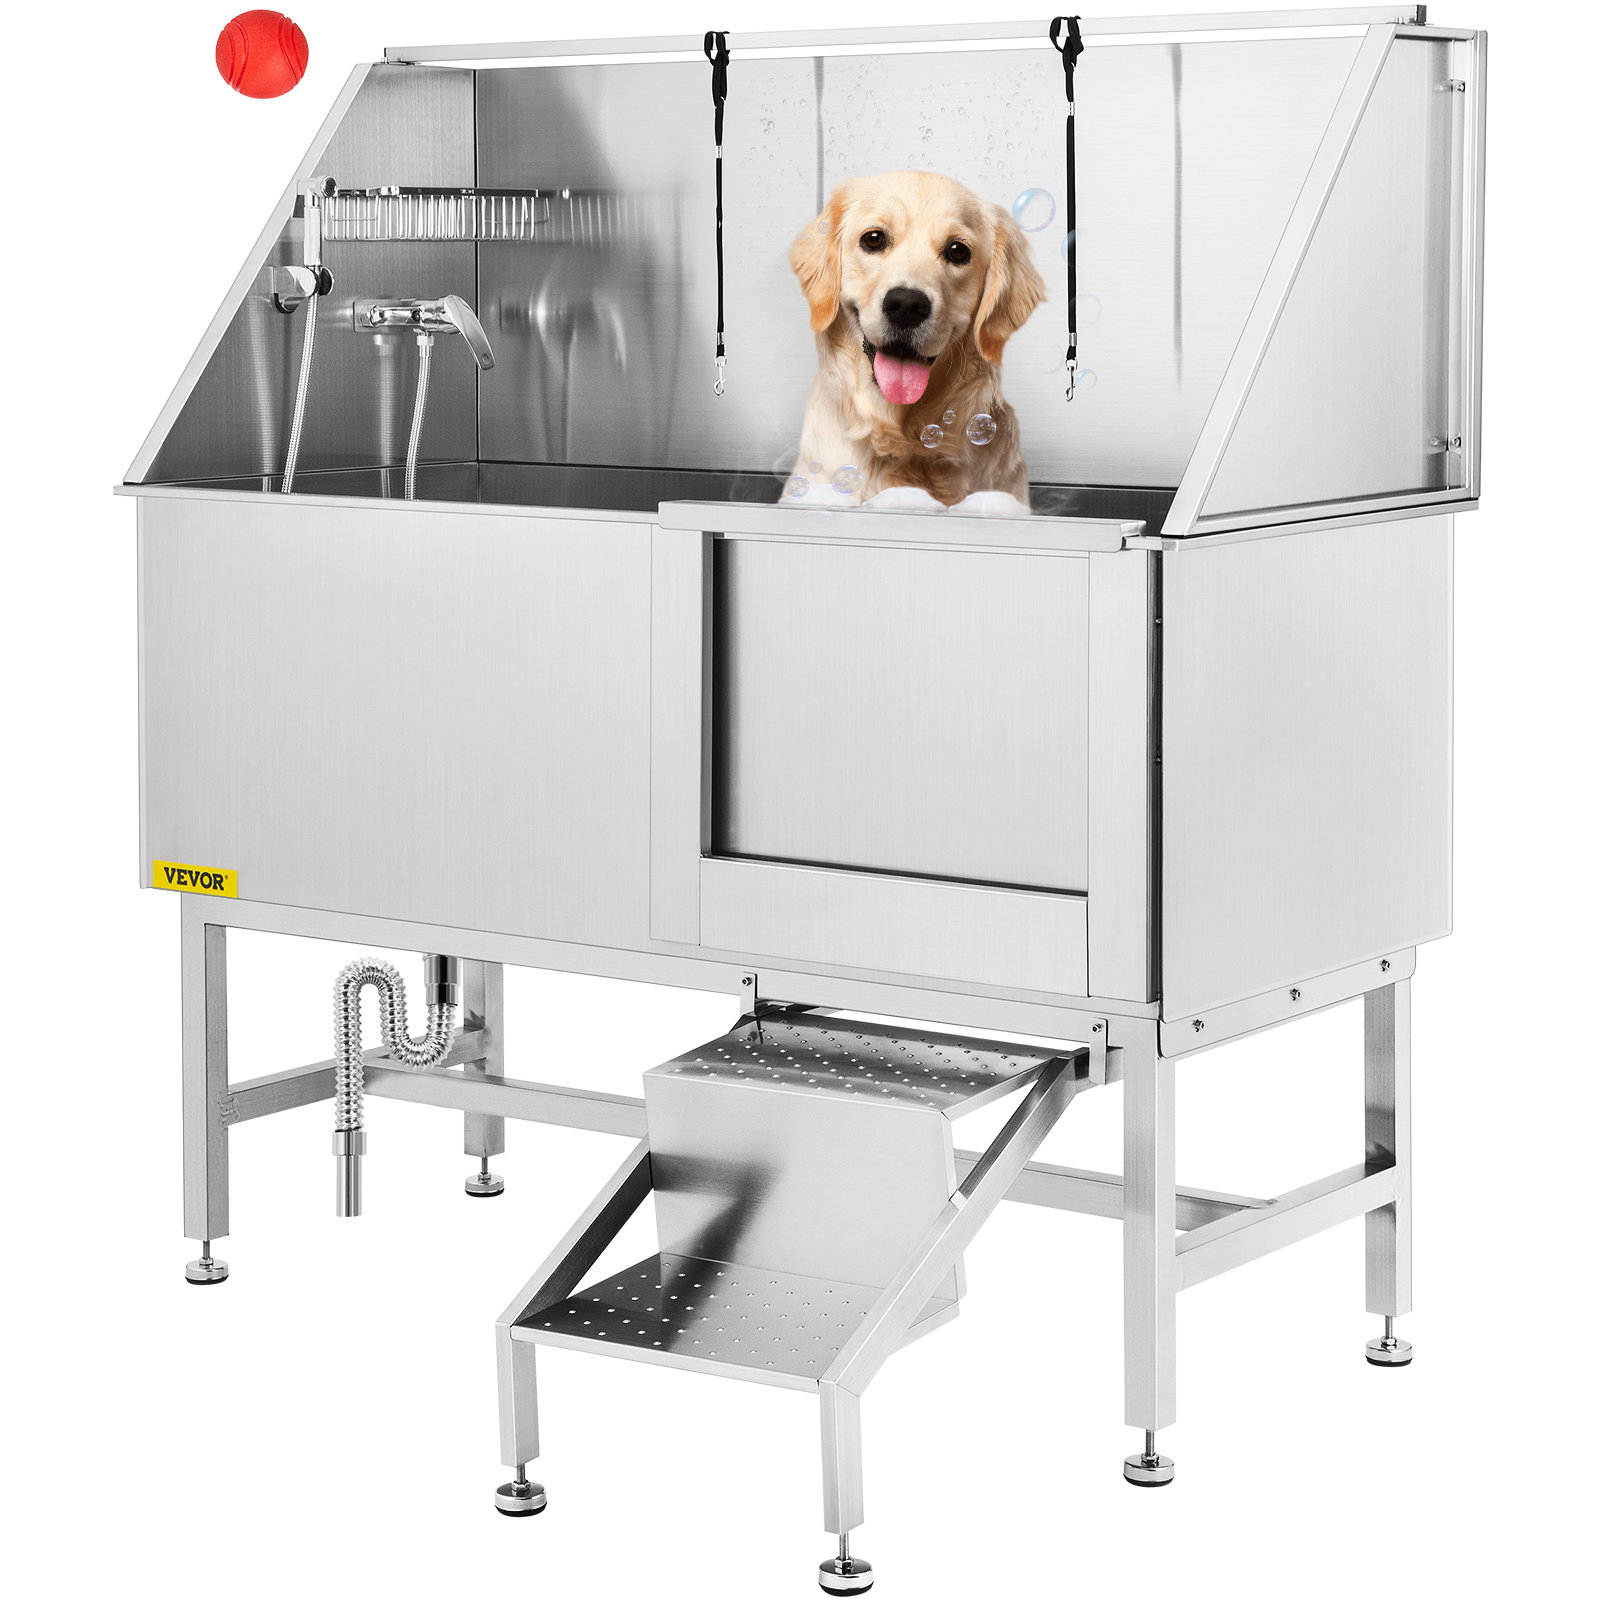 62" Pet Grooming Tub Dog Cat Bath Tub Professional Stainless Steel Wash Shower от Vevor Many GEOs